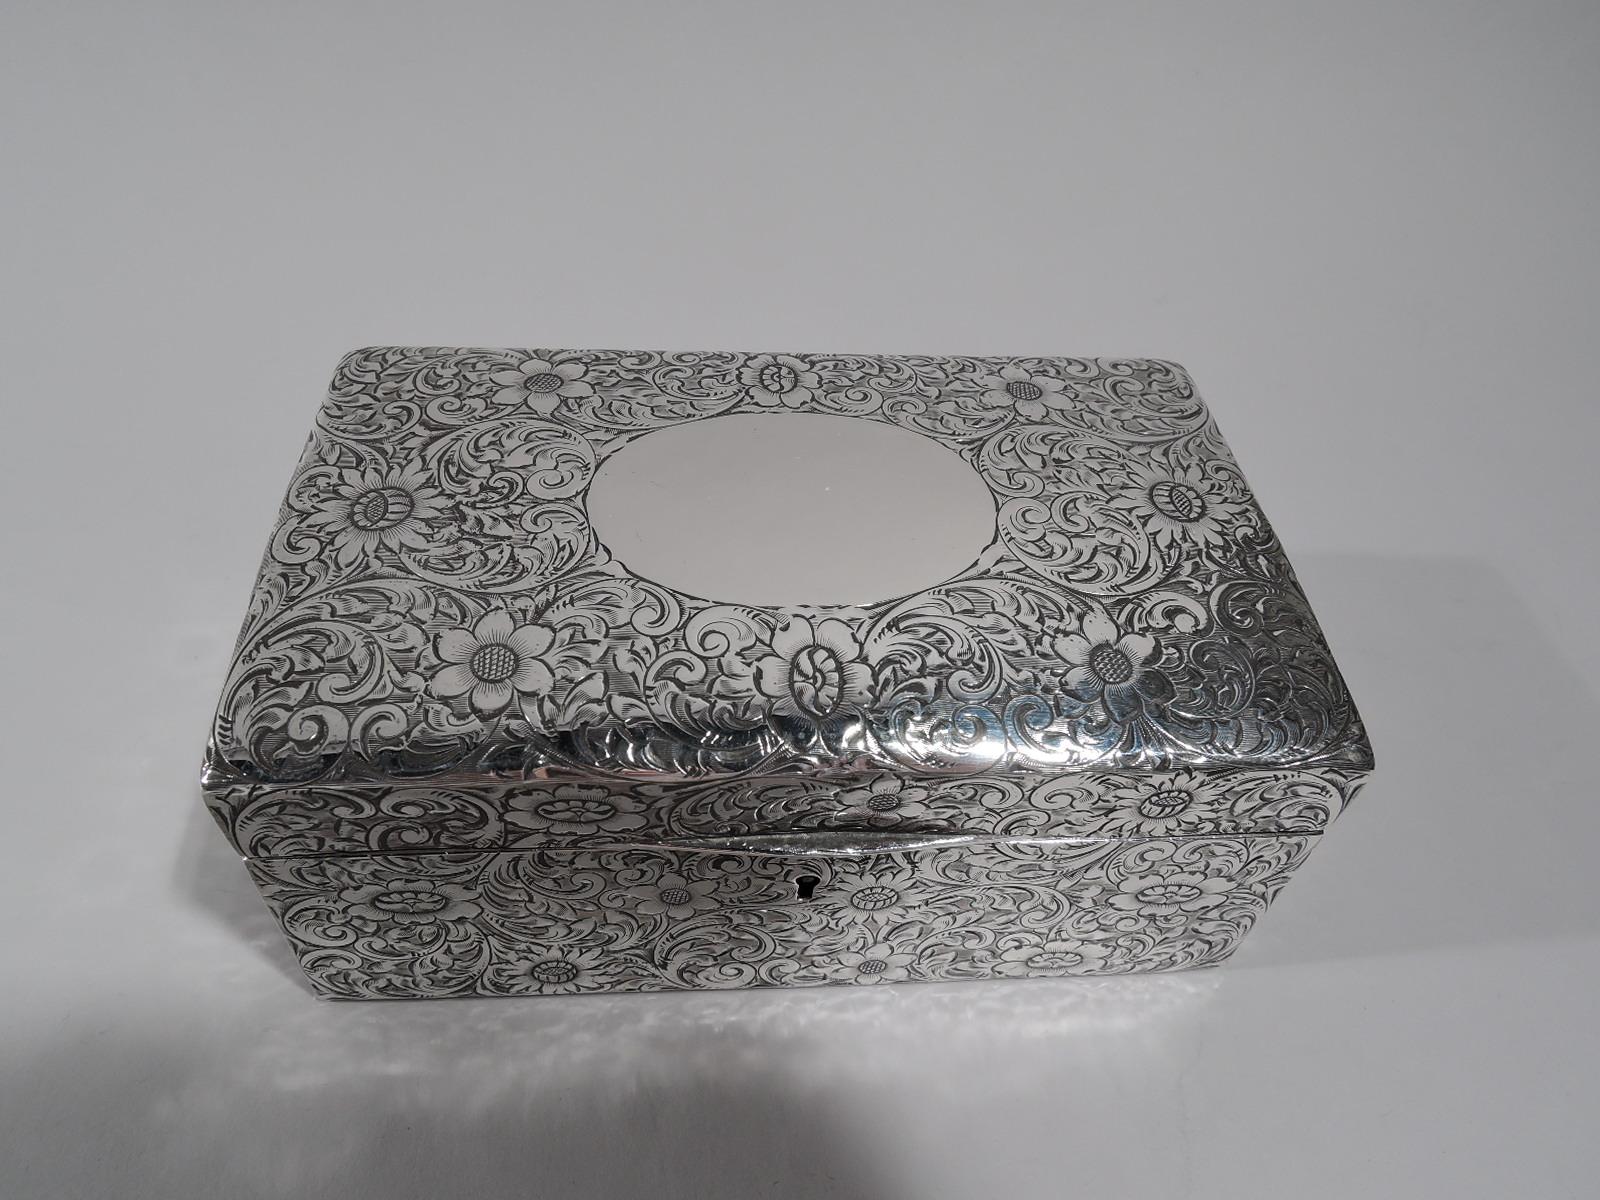 American Art Nouveau sterling silver jewelry box, circa 1910. Rectangular with straight sides. Cover hinged and gently curved with tapering tab. Dense scrolling flowers engraved all-over. Cover top has large oval frame (vacant). Box and cover velvet